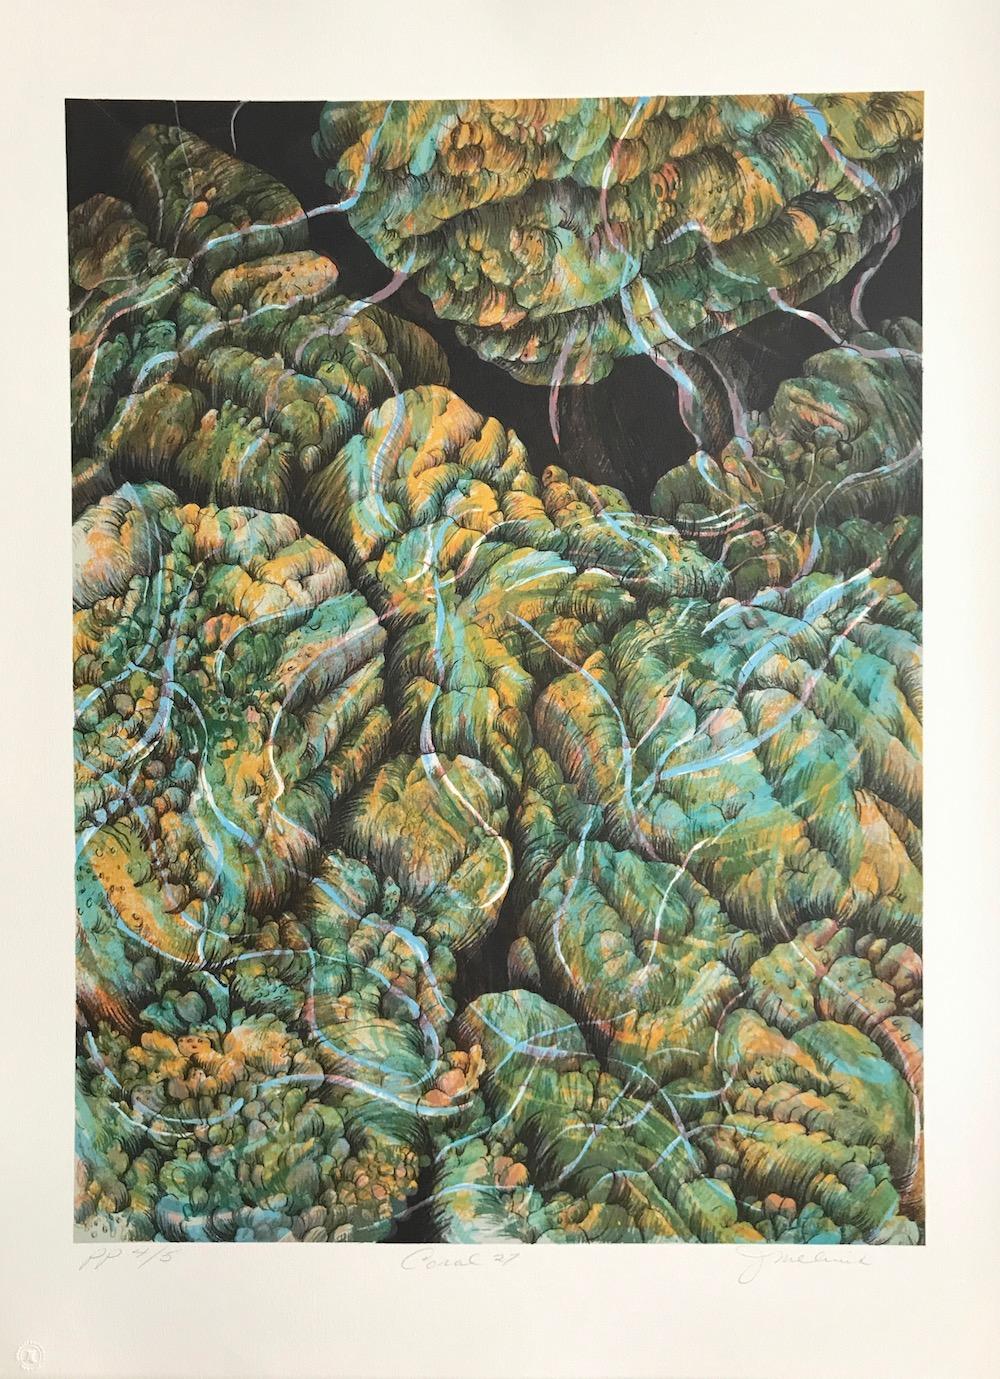 Coral 27 is an original hand drawn lithograph by the NY woman artist, Joan Melnick. Inspired by the fragile beauty of reefs with their exotic forms and vibrant colors, Coral 27 is an abstract composition comprised of subdued shades of aqua, light